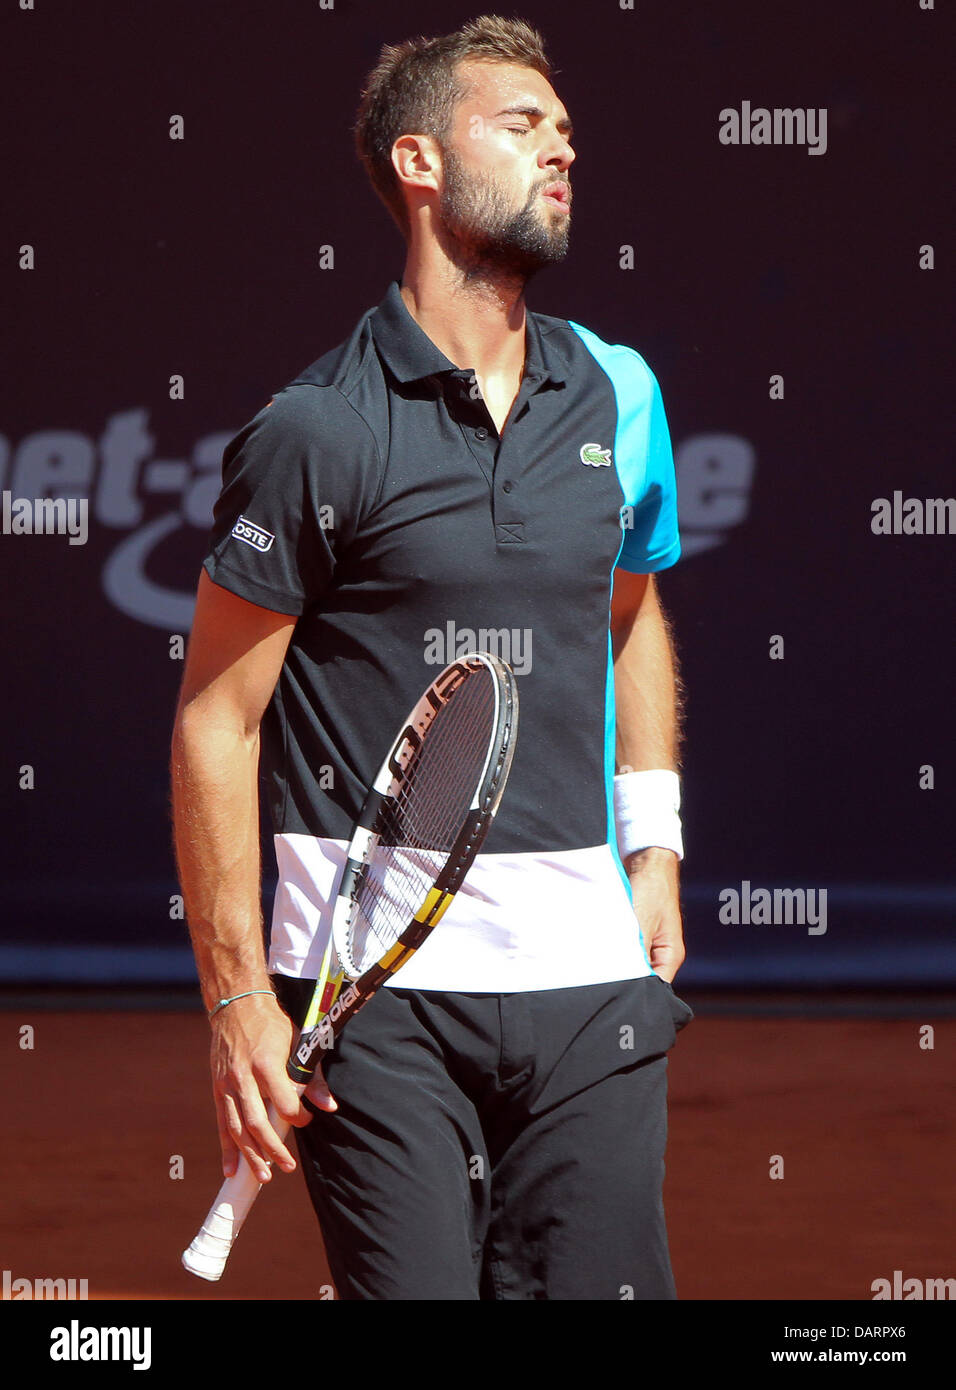 Hamburg, Germany. 18th July, 2013. Benoit Paire of France reacts in the round of 16 match against Monaco of Argetina during the ATP tournament in Hamburg, Germany, 18 July 2013. Photo: AXEL HEIMKEN/dpa/Alamy Live News Stock Photo